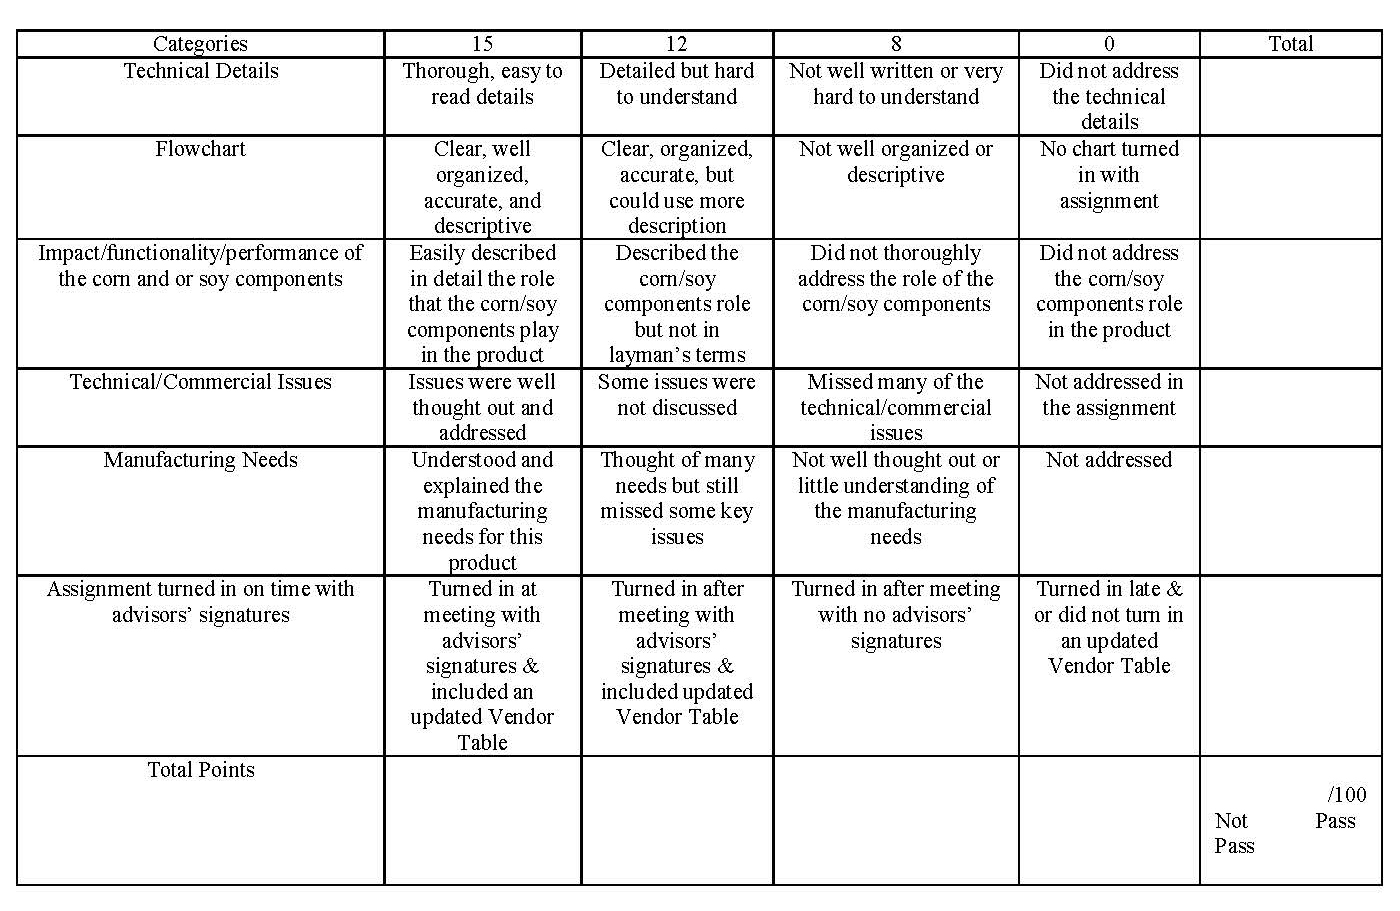 lit review summary table